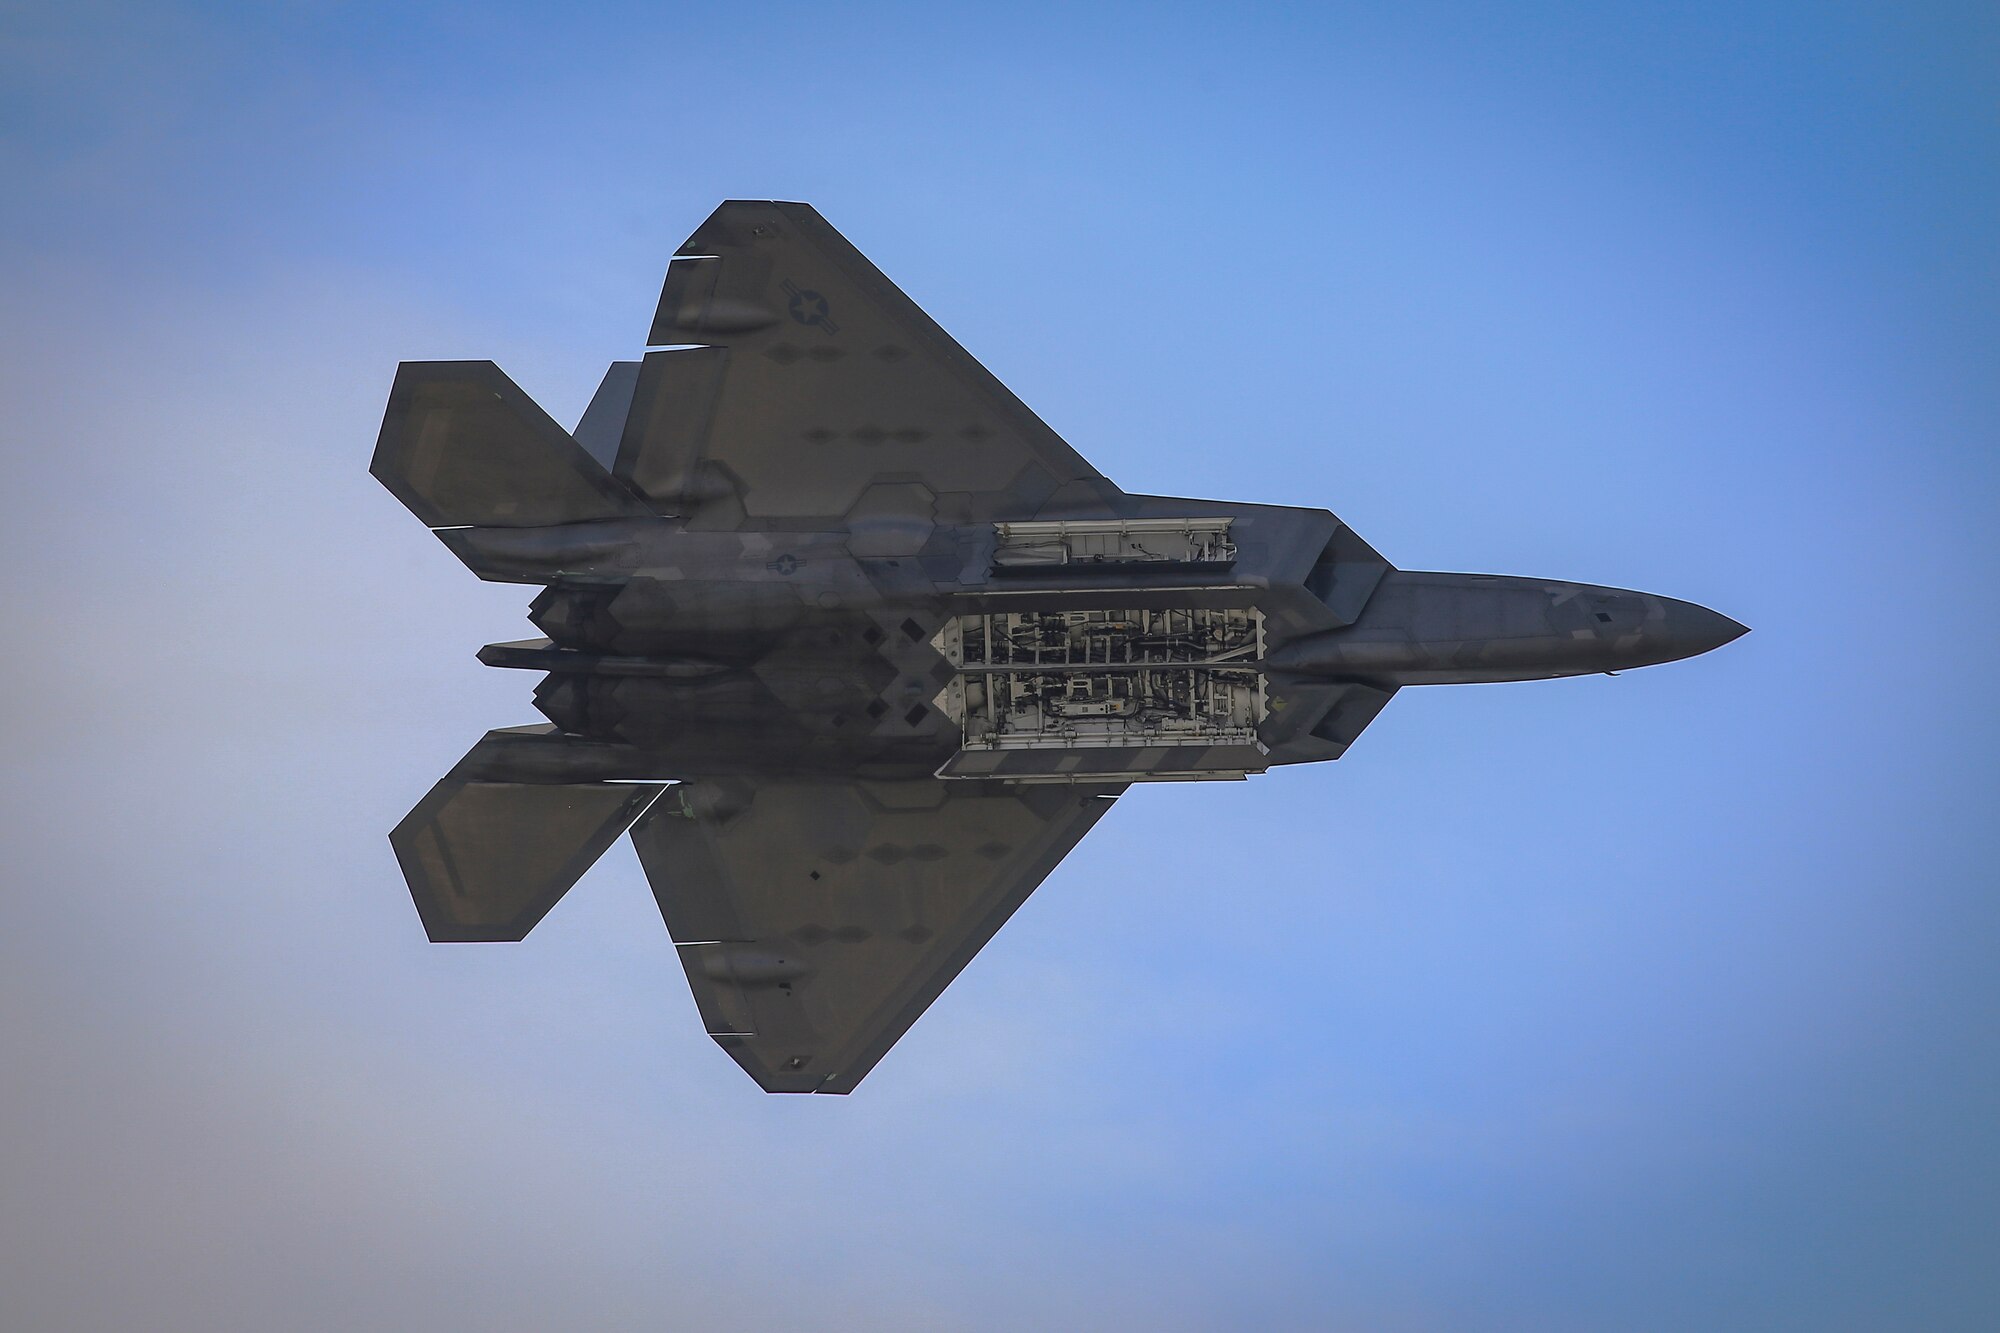 An F-22 Raptor piloted by Maj. Paul Lopez performs a single-ship demonstration at the 2018 Power in the Pines Open House and Air Show rehearsal held at Joint Base McGuire-Dix-Lakehurst, N.J., May 4, 2018. The F-22 Demo Team is based out of Joint Base Langley-Eustis, Va. (U.S. Air National Guard photo by Master Sgt. Matt Hecht)